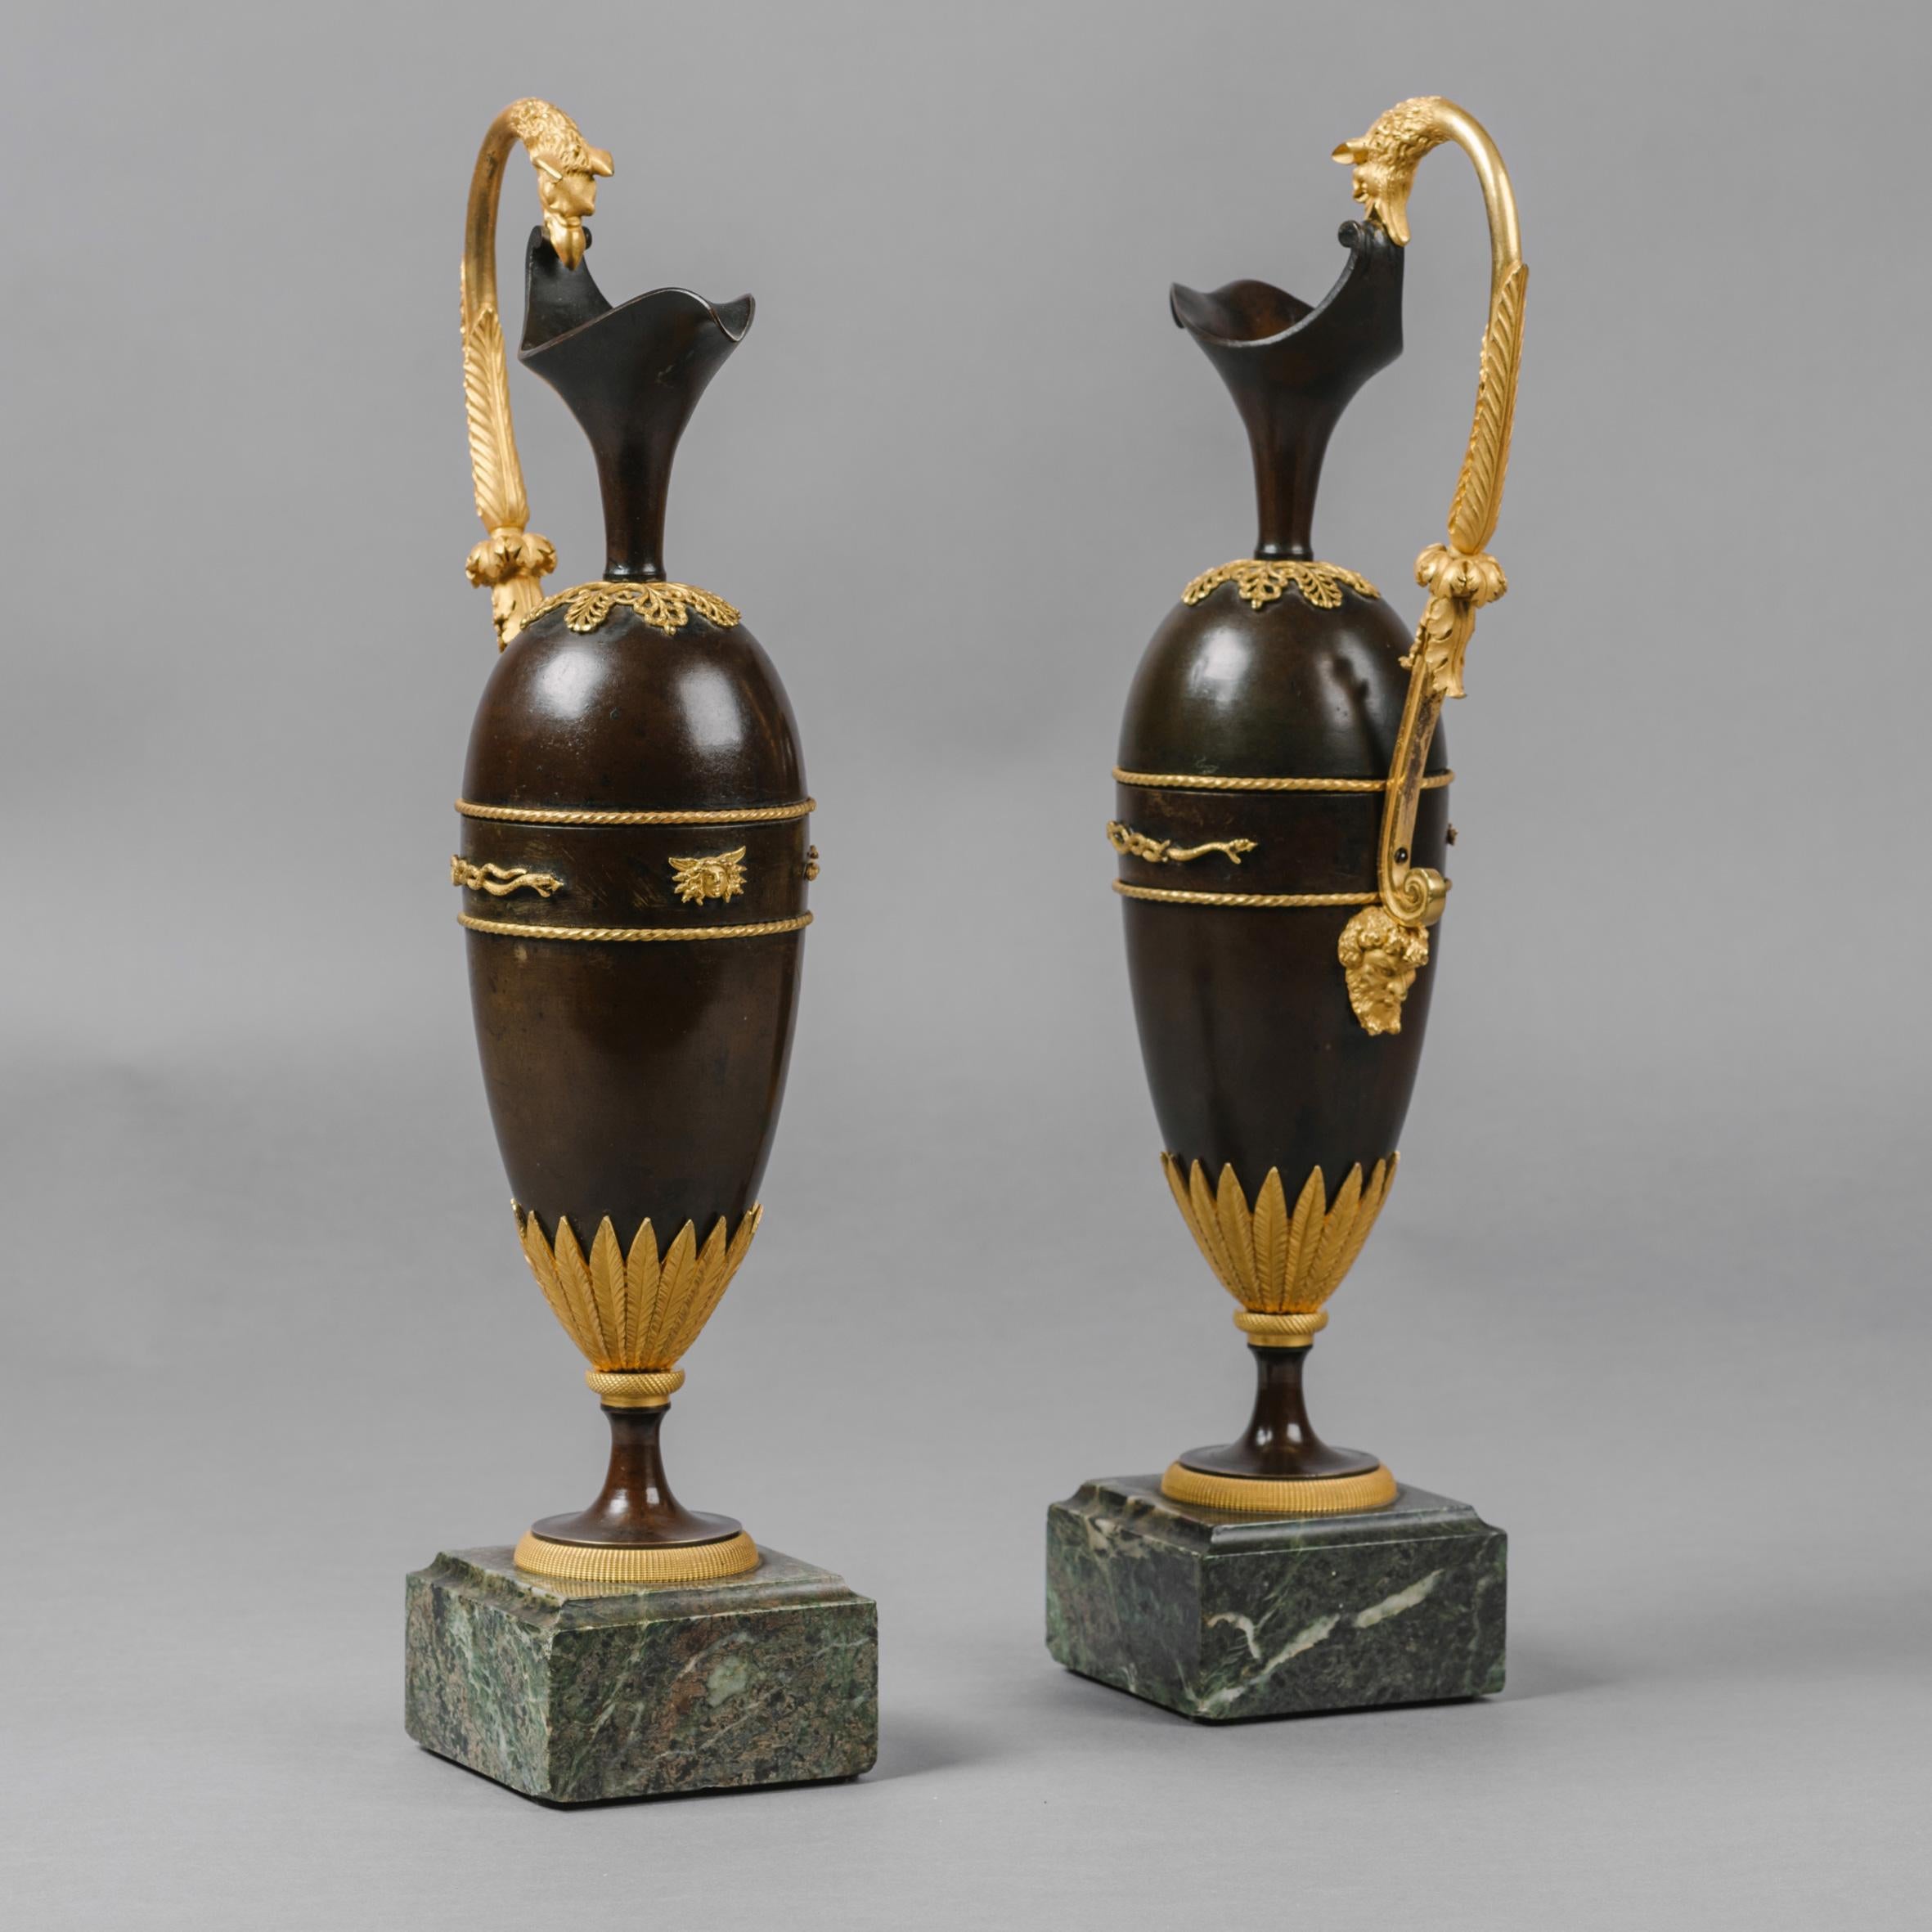 A fine pair of empire gilt and patinated bronze ewers in the manner of Claude Galle.

French, Circa 1820.